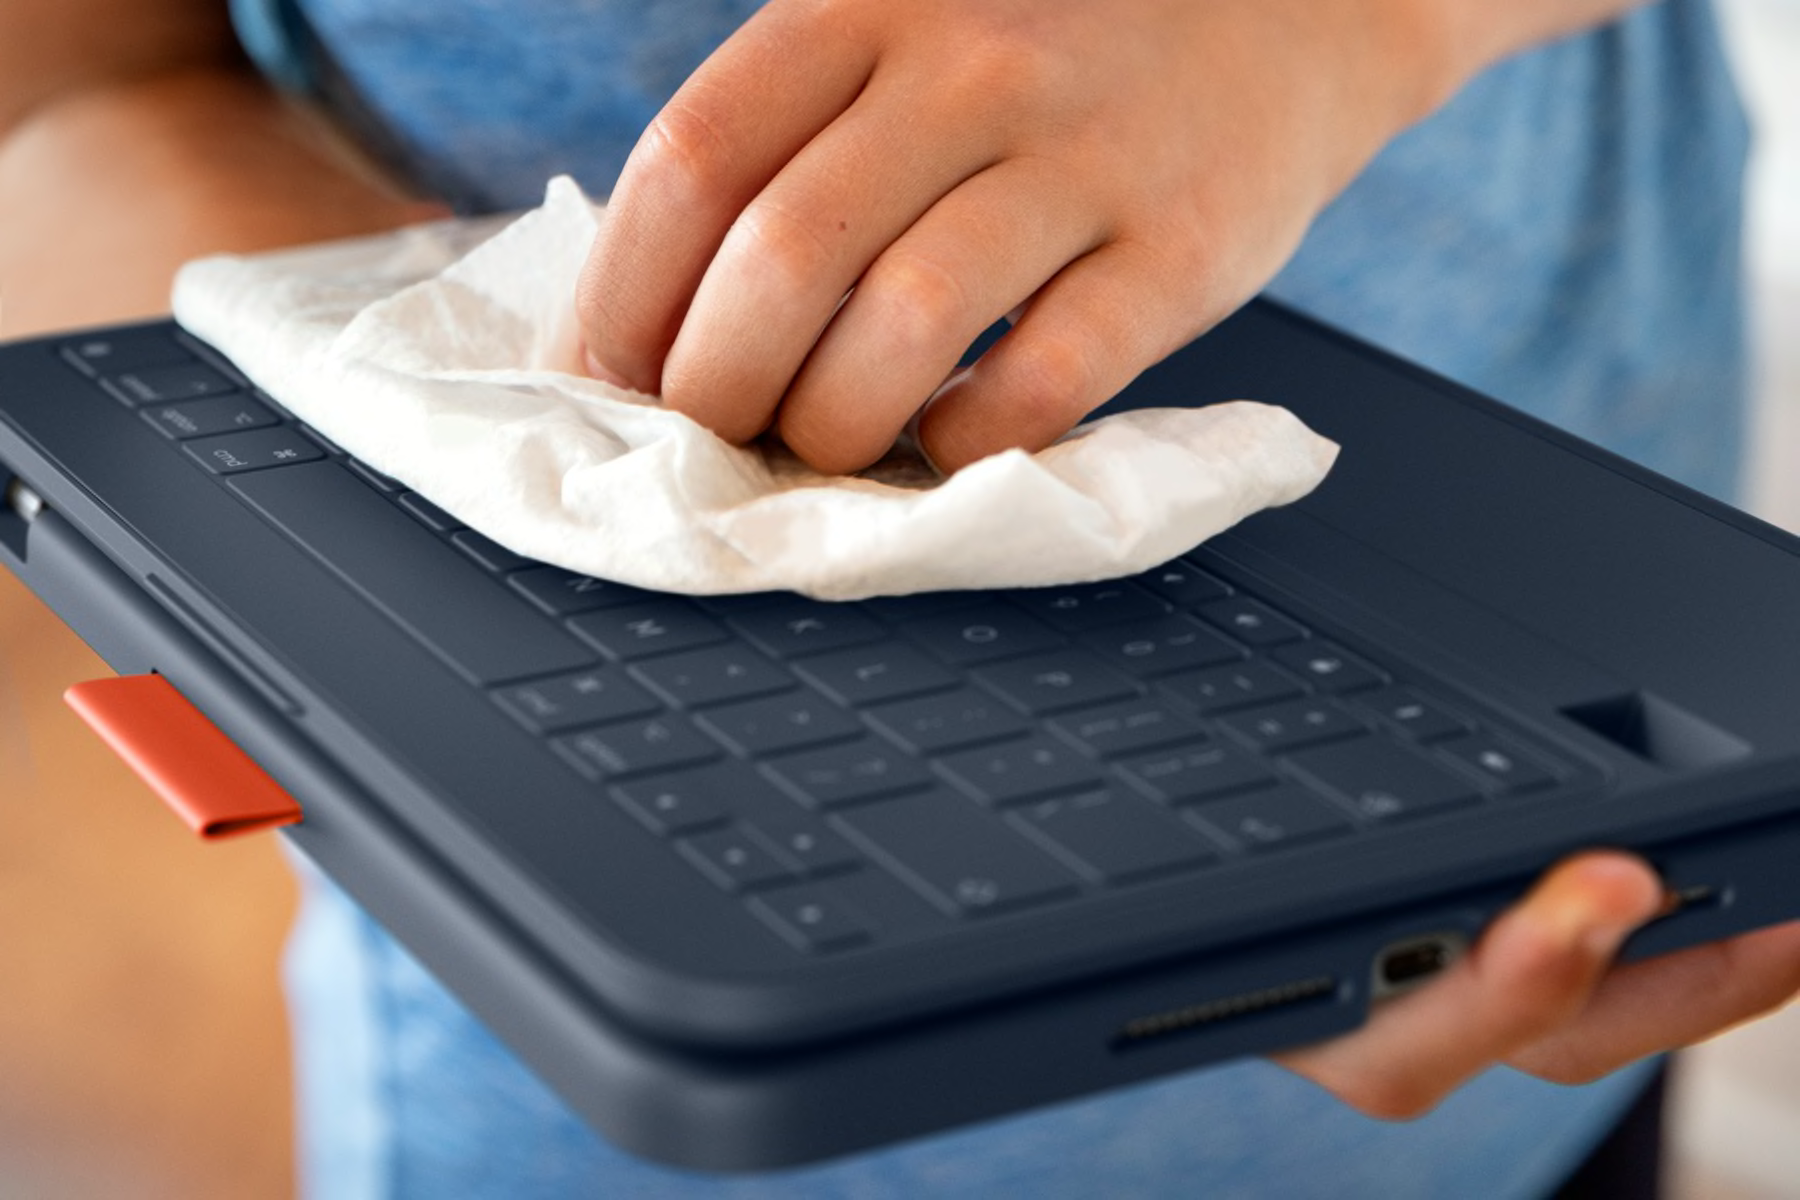 Tablet keyboard that is easy to clean